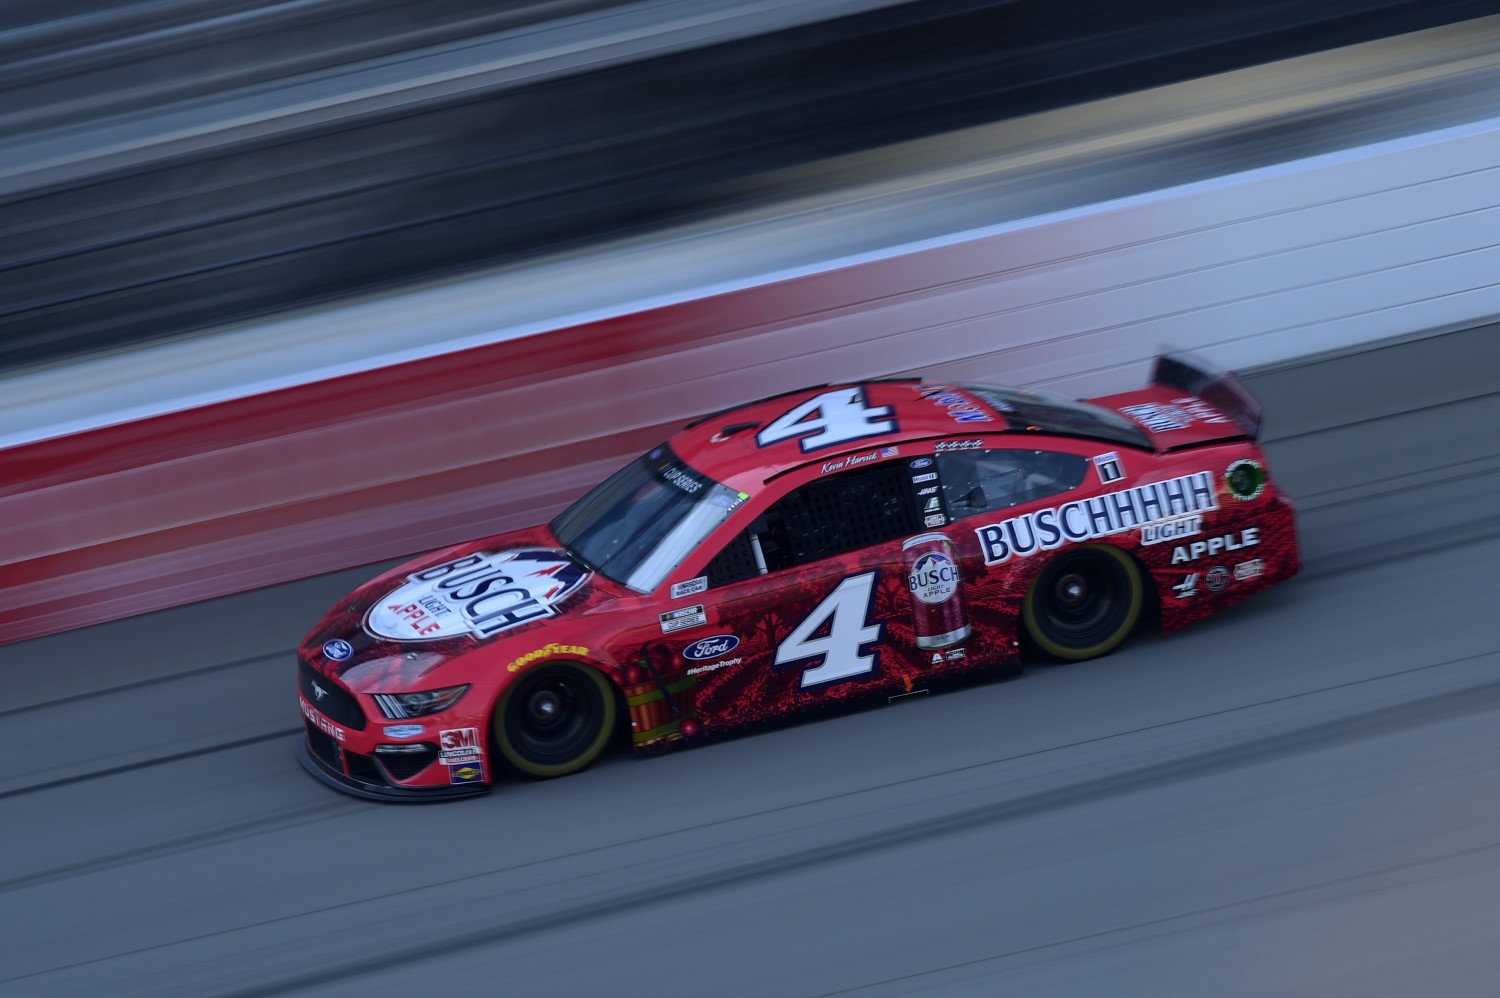 #4 Kevin Harvick completes the Michigan sweep